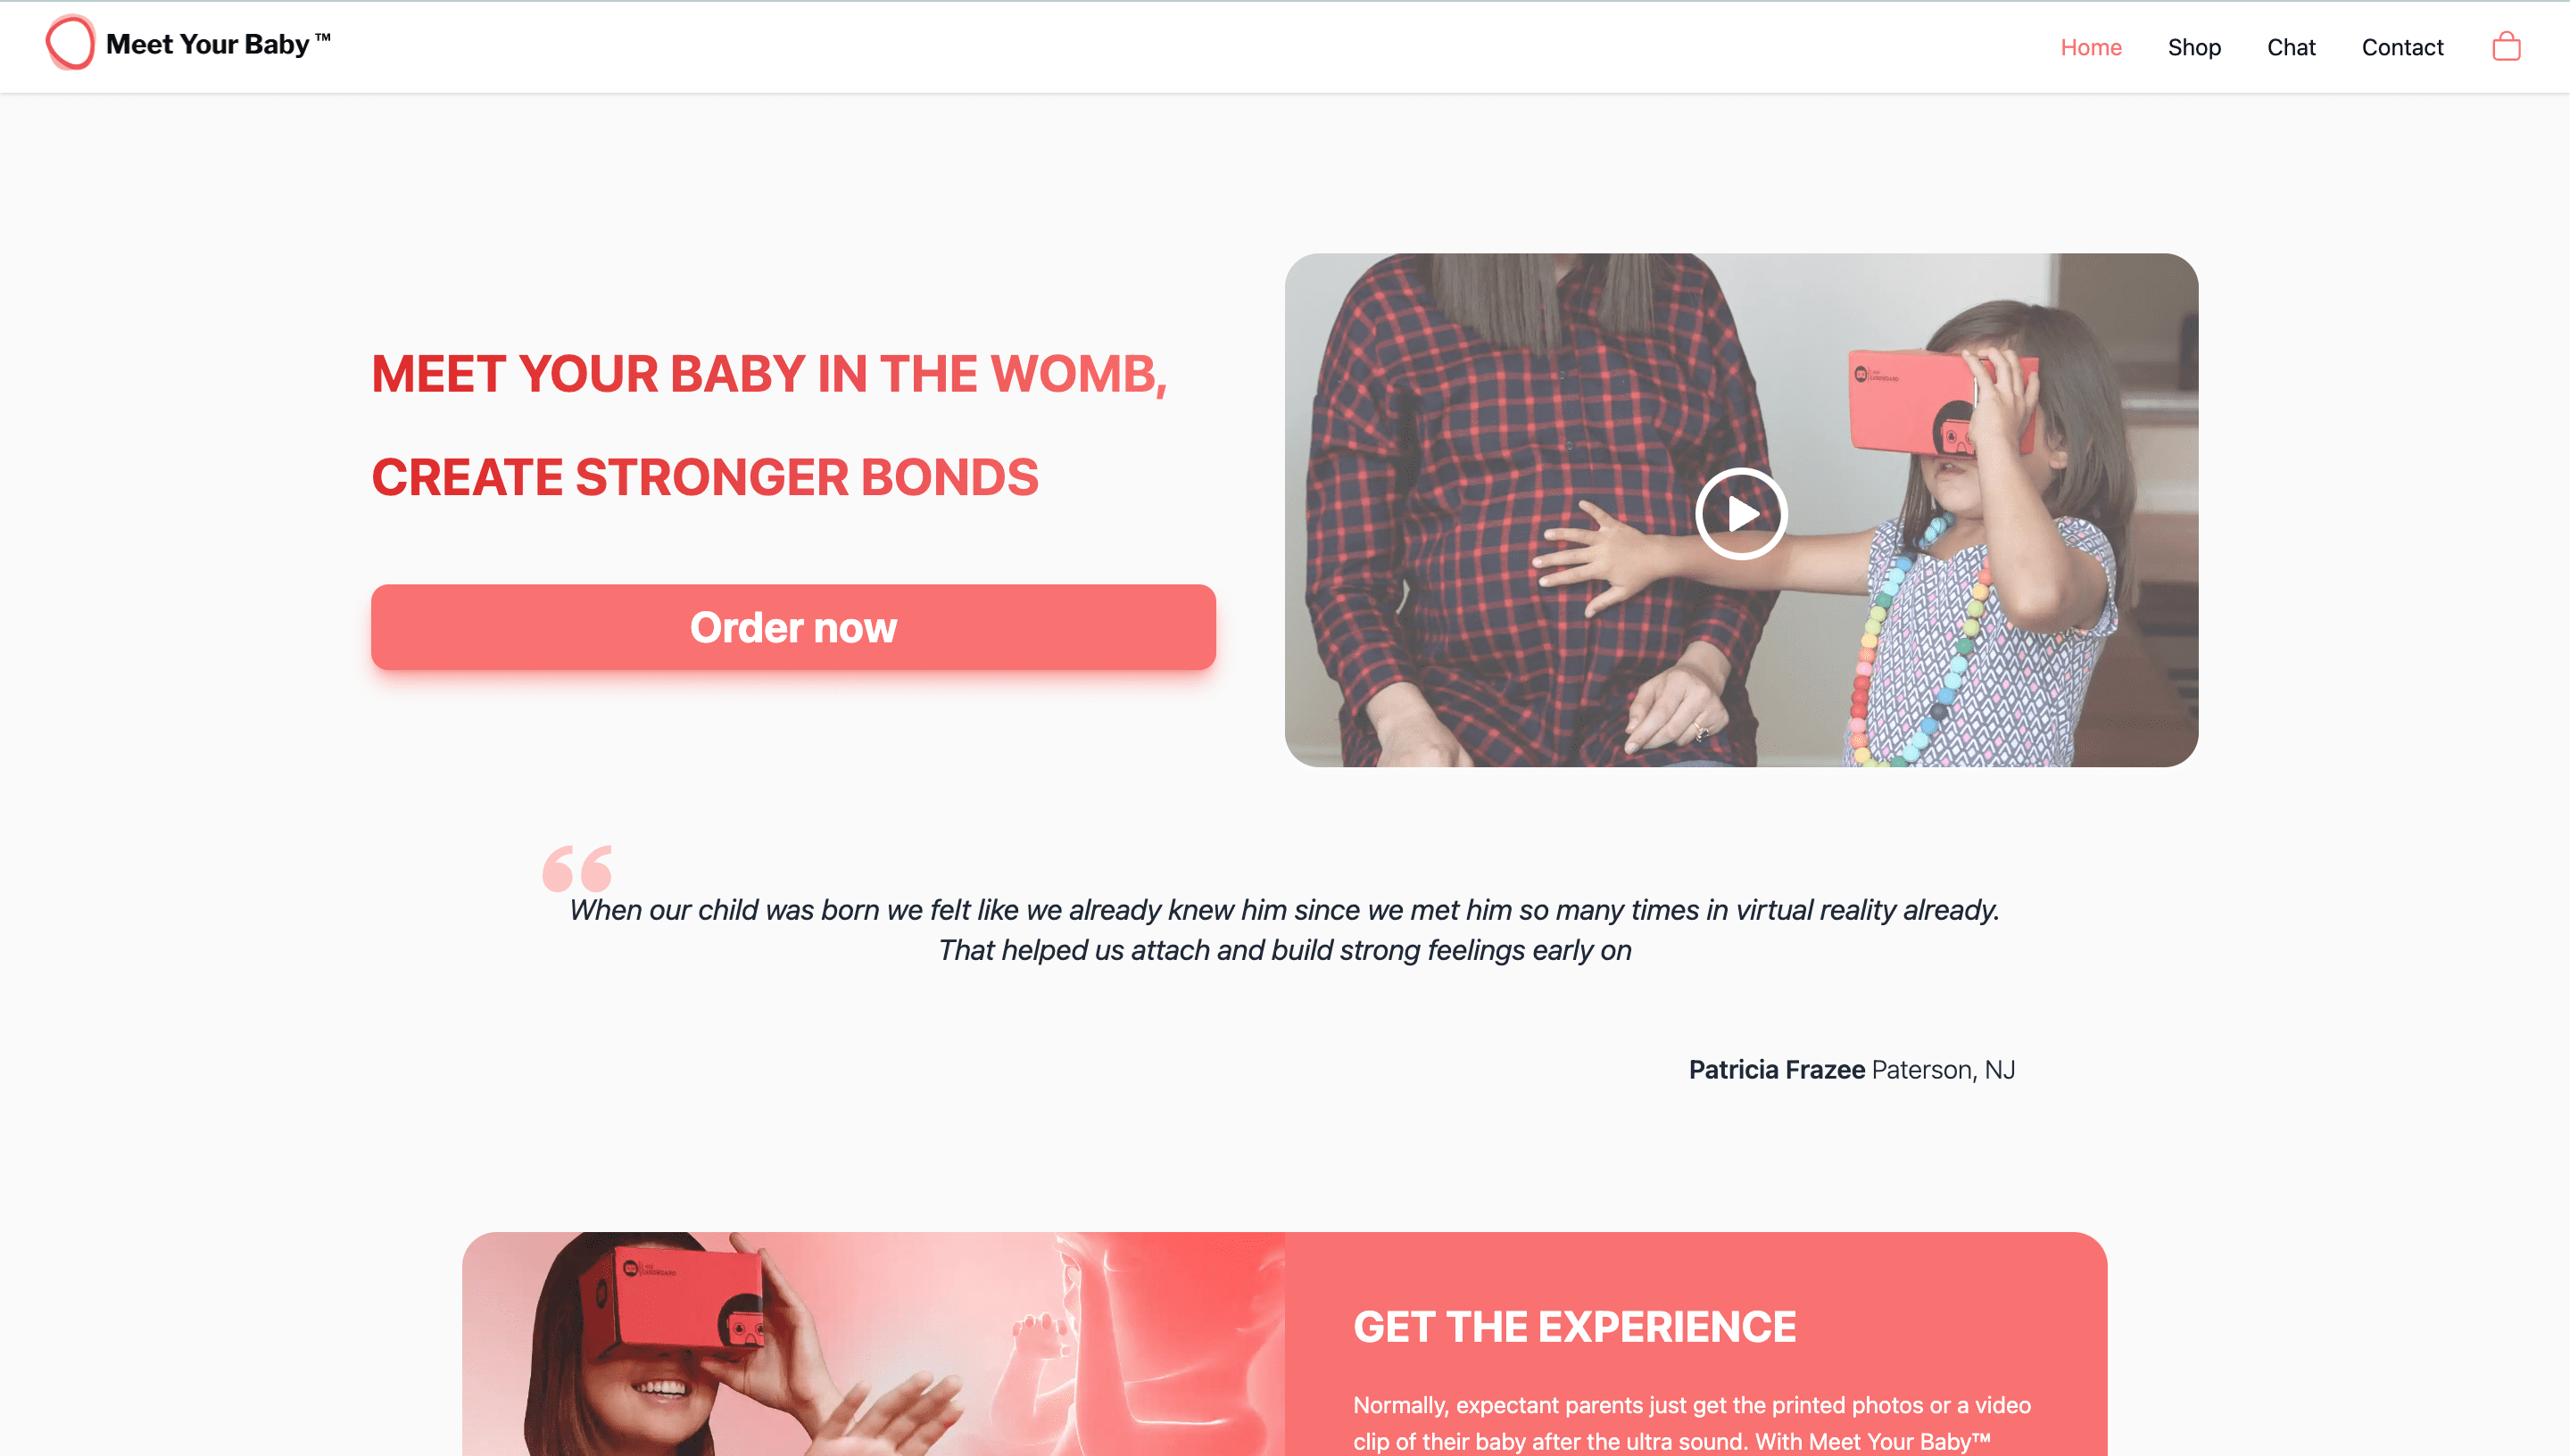 Landing page for the Meet Your Baby VR experience.